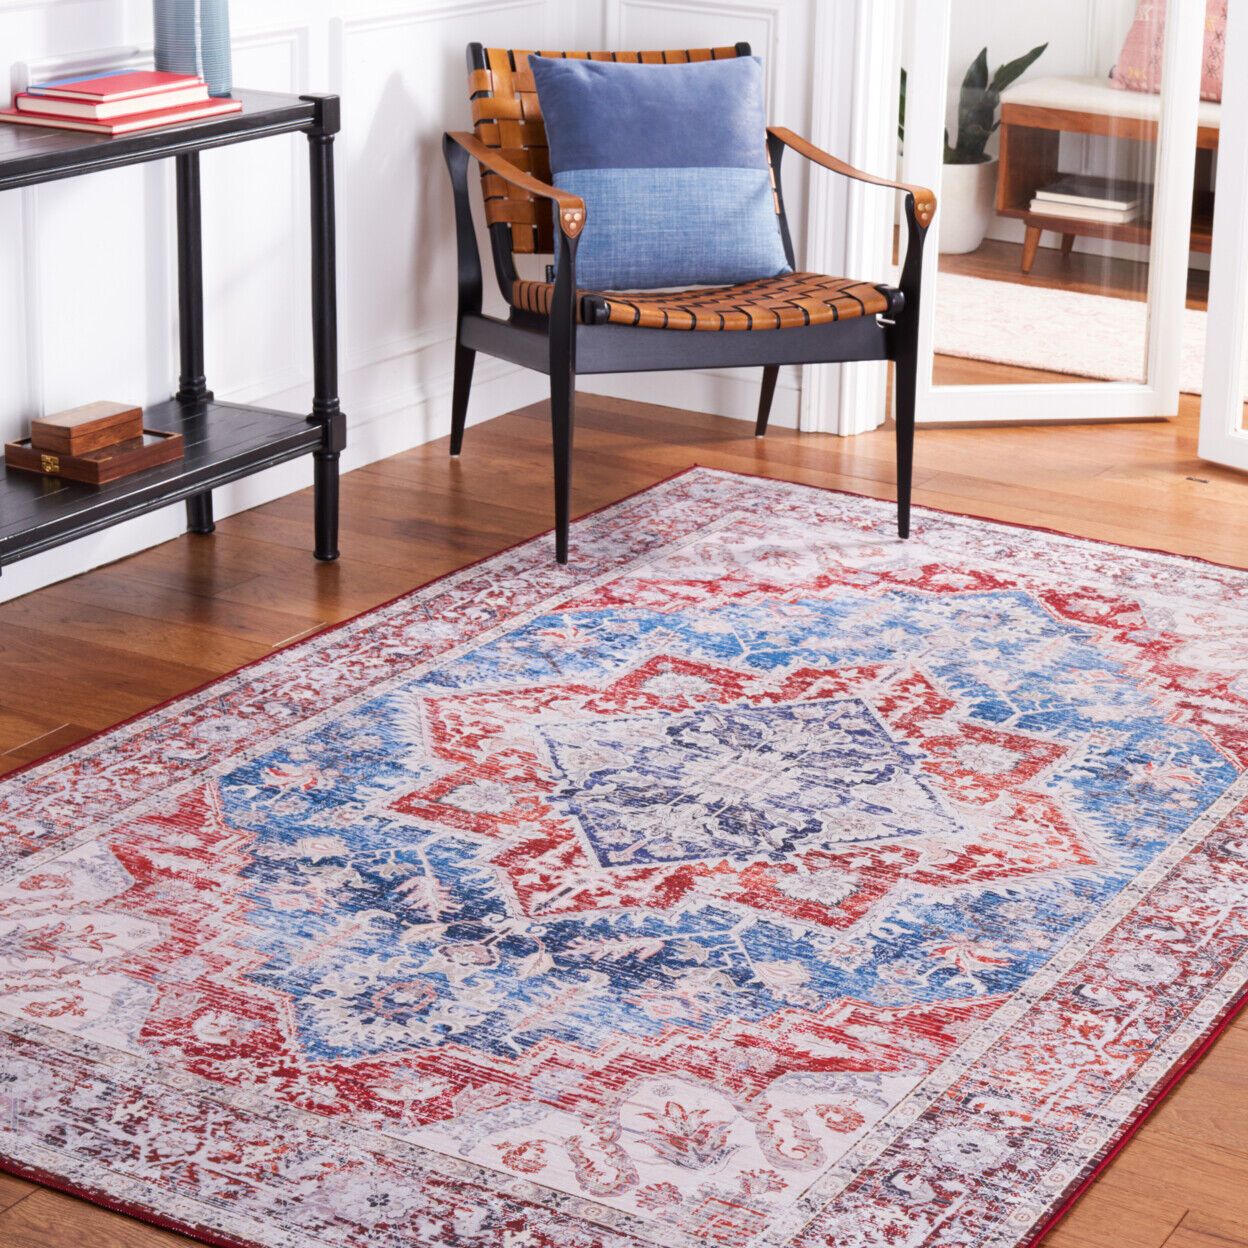 Safavieh Tucson Collection Tsn115M Blue / Red Rug | Ebay Inside Blue Tucson Rugs (View 6 of 15)